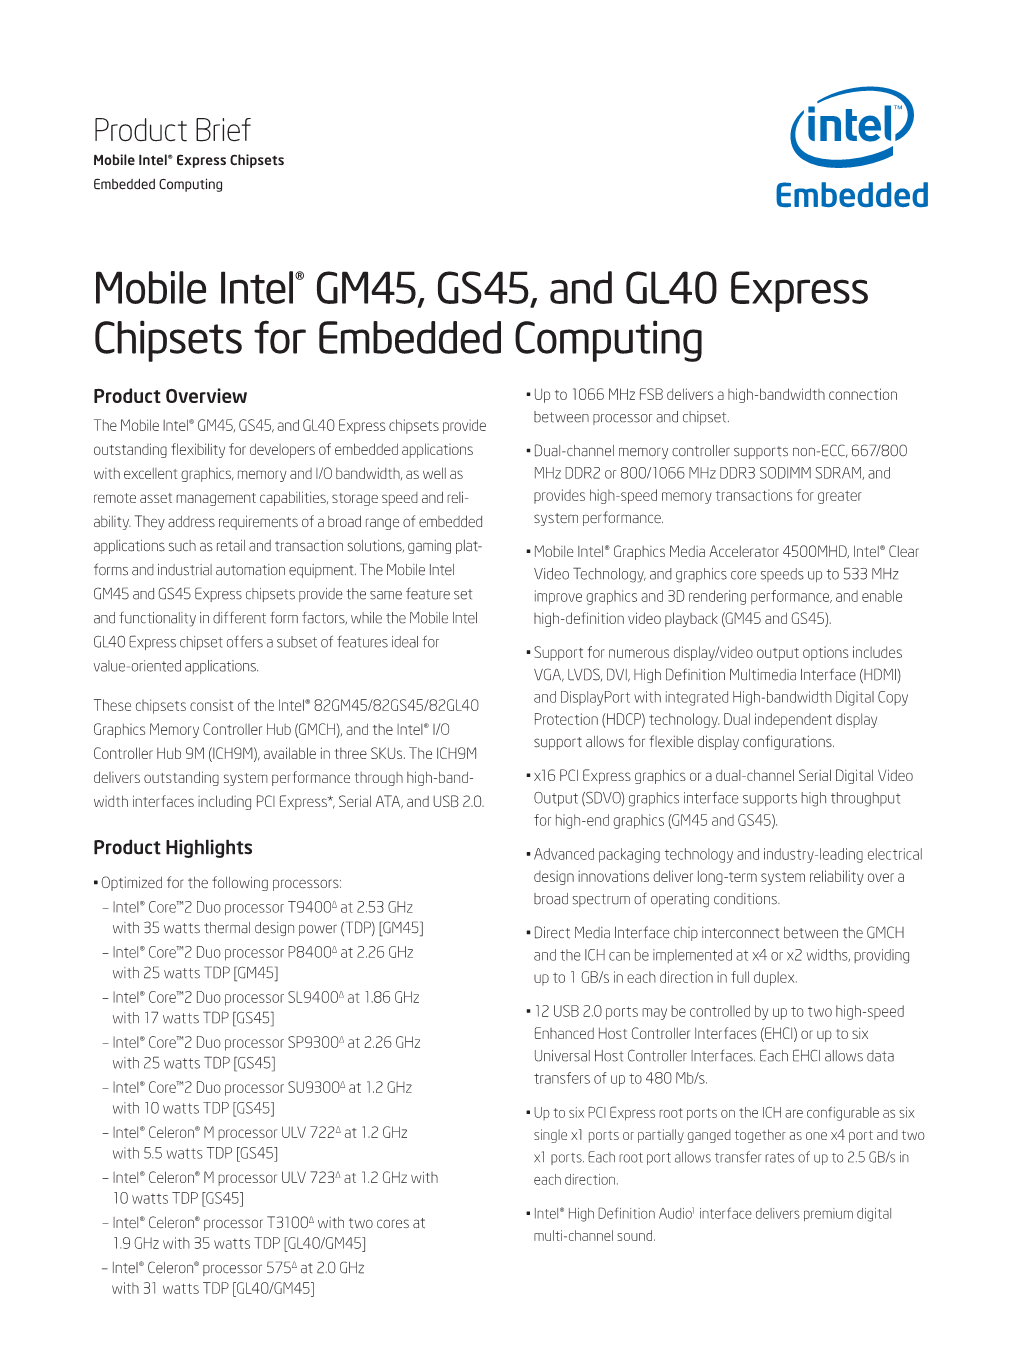 Mobile Intel® GM45, GS45, and GL40 Express Chipsets for Embedded Computing